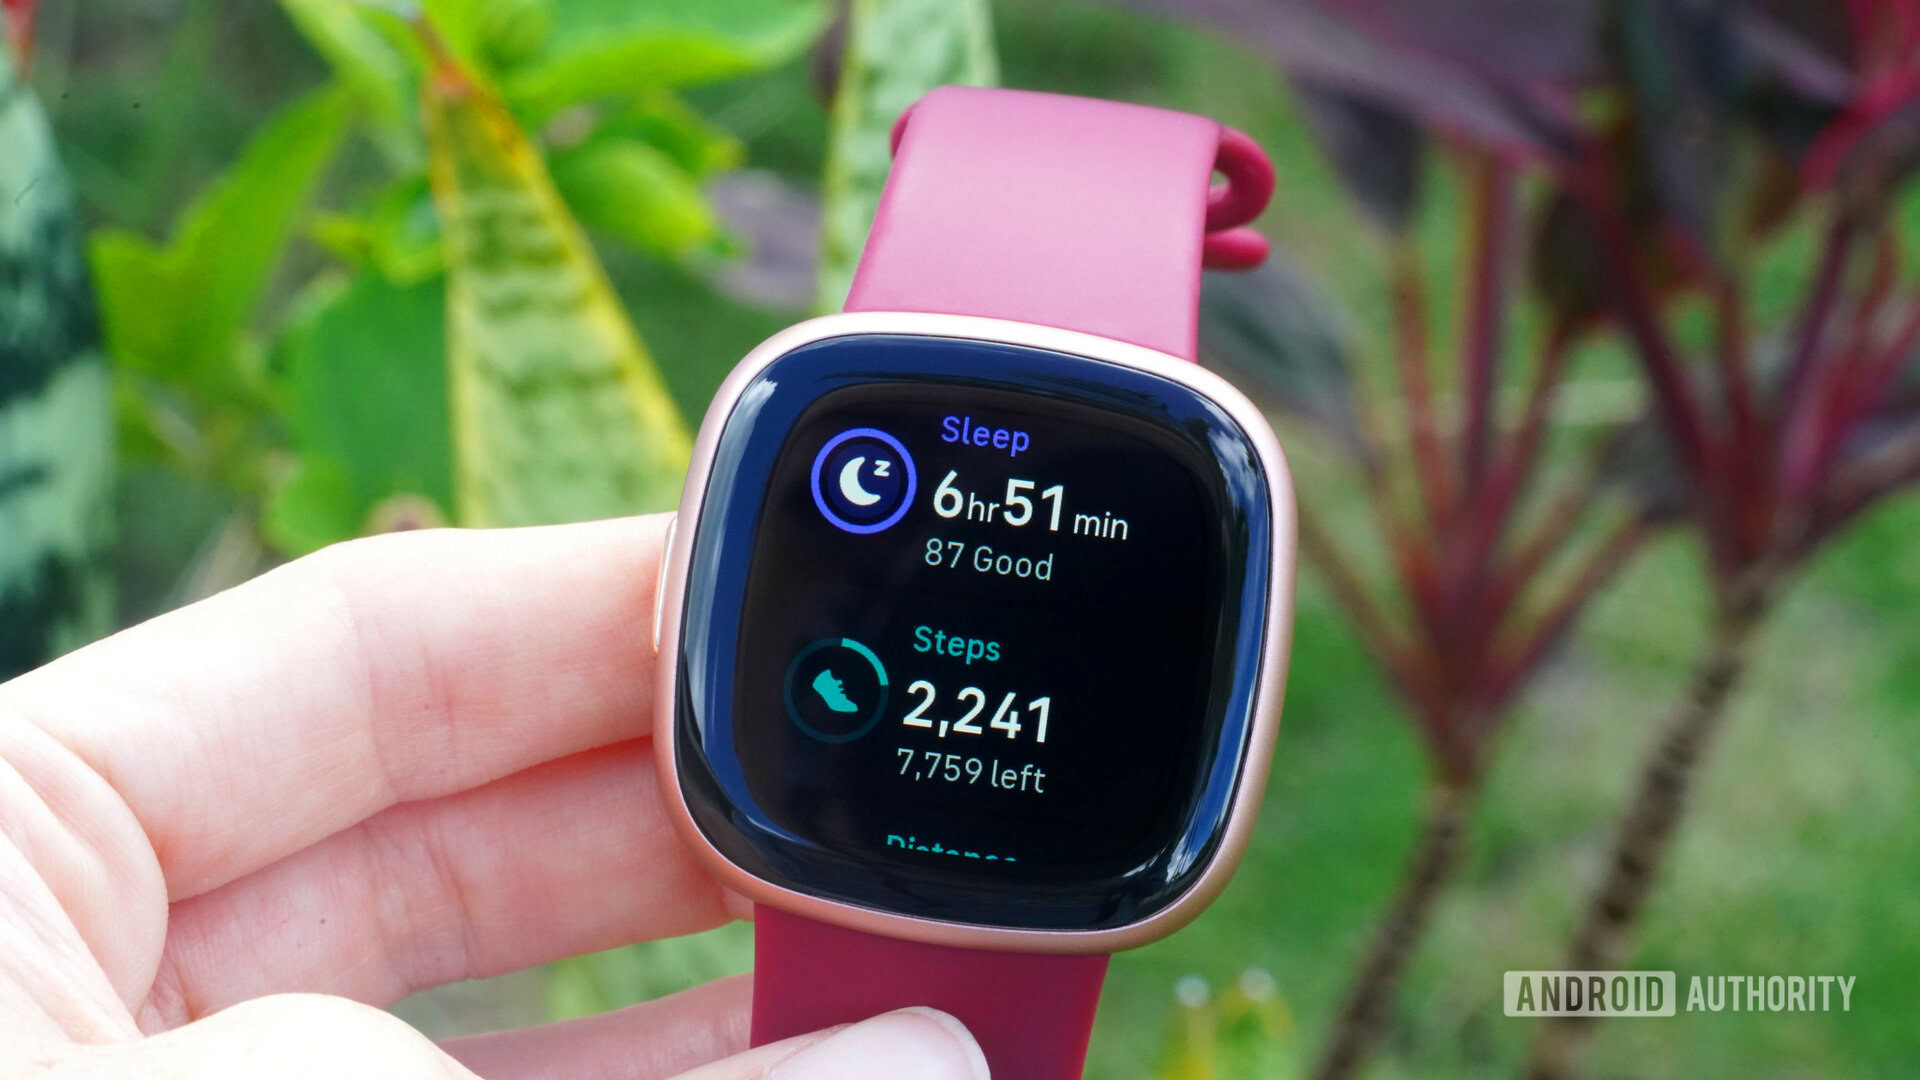 Fitbit Versa 4 Smart Watch with Water Resistance, Black and Graphite  Aluminium